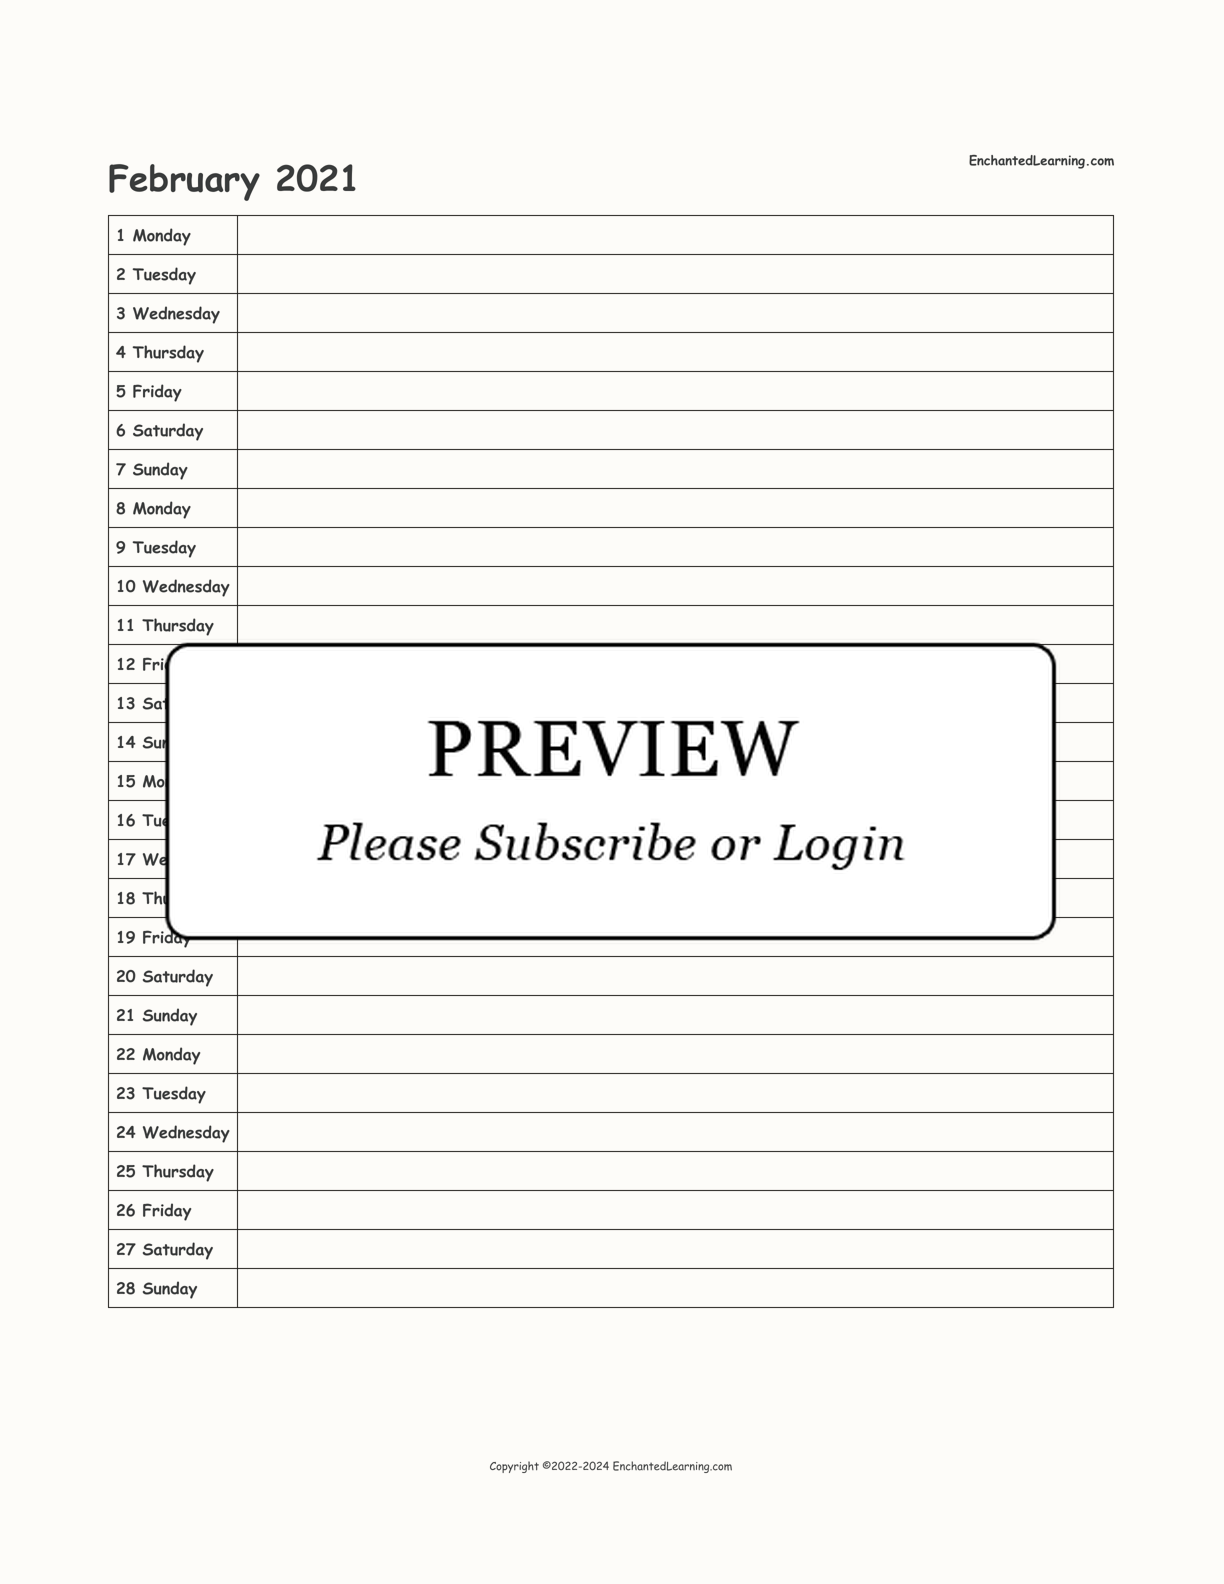 2021 Scheduling Calendar interactive printout page 2